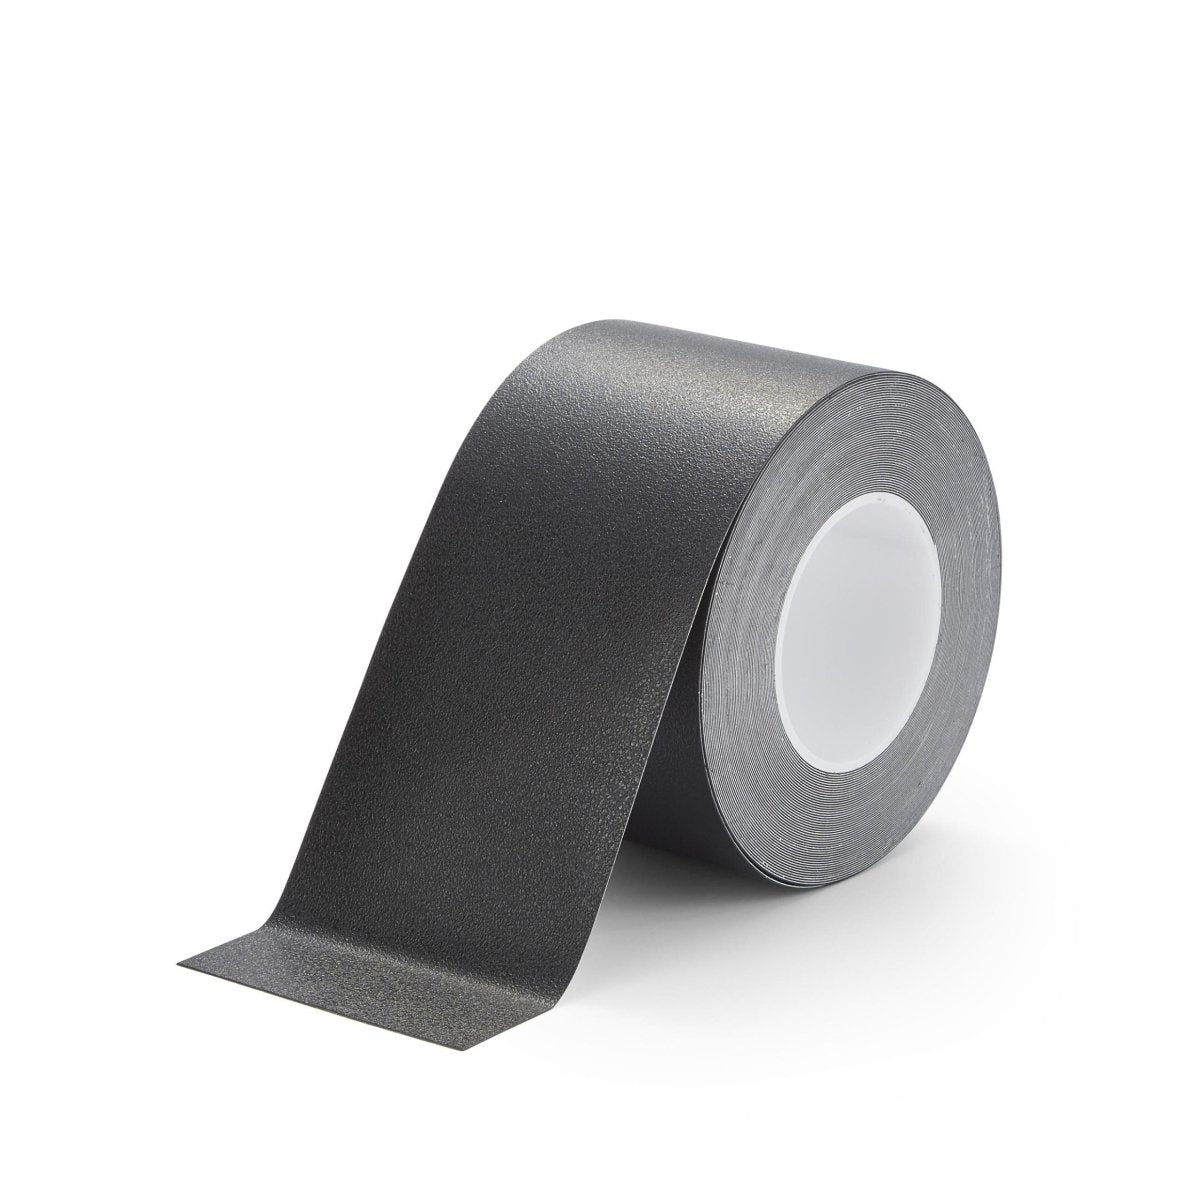 Resilient Soft Touch Textured "Rubber Feel" Anti-Slip Tape - Slips Away - H3408N-Black-Resilient-100mm -